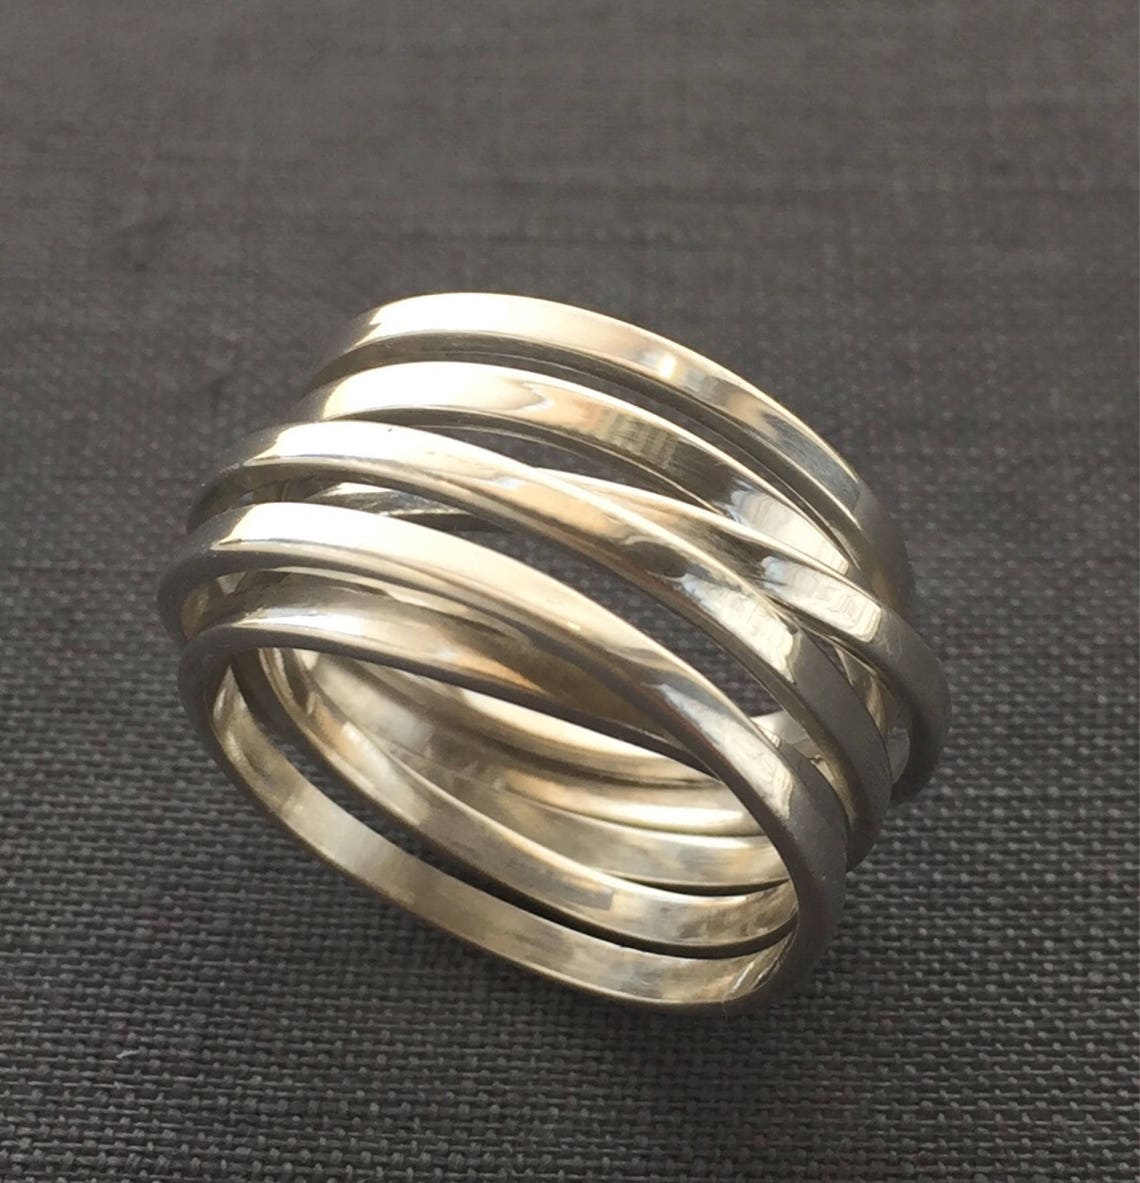 Wrapped Silver Ring//Sculptural Band//Silver Wire Ring | Etsy